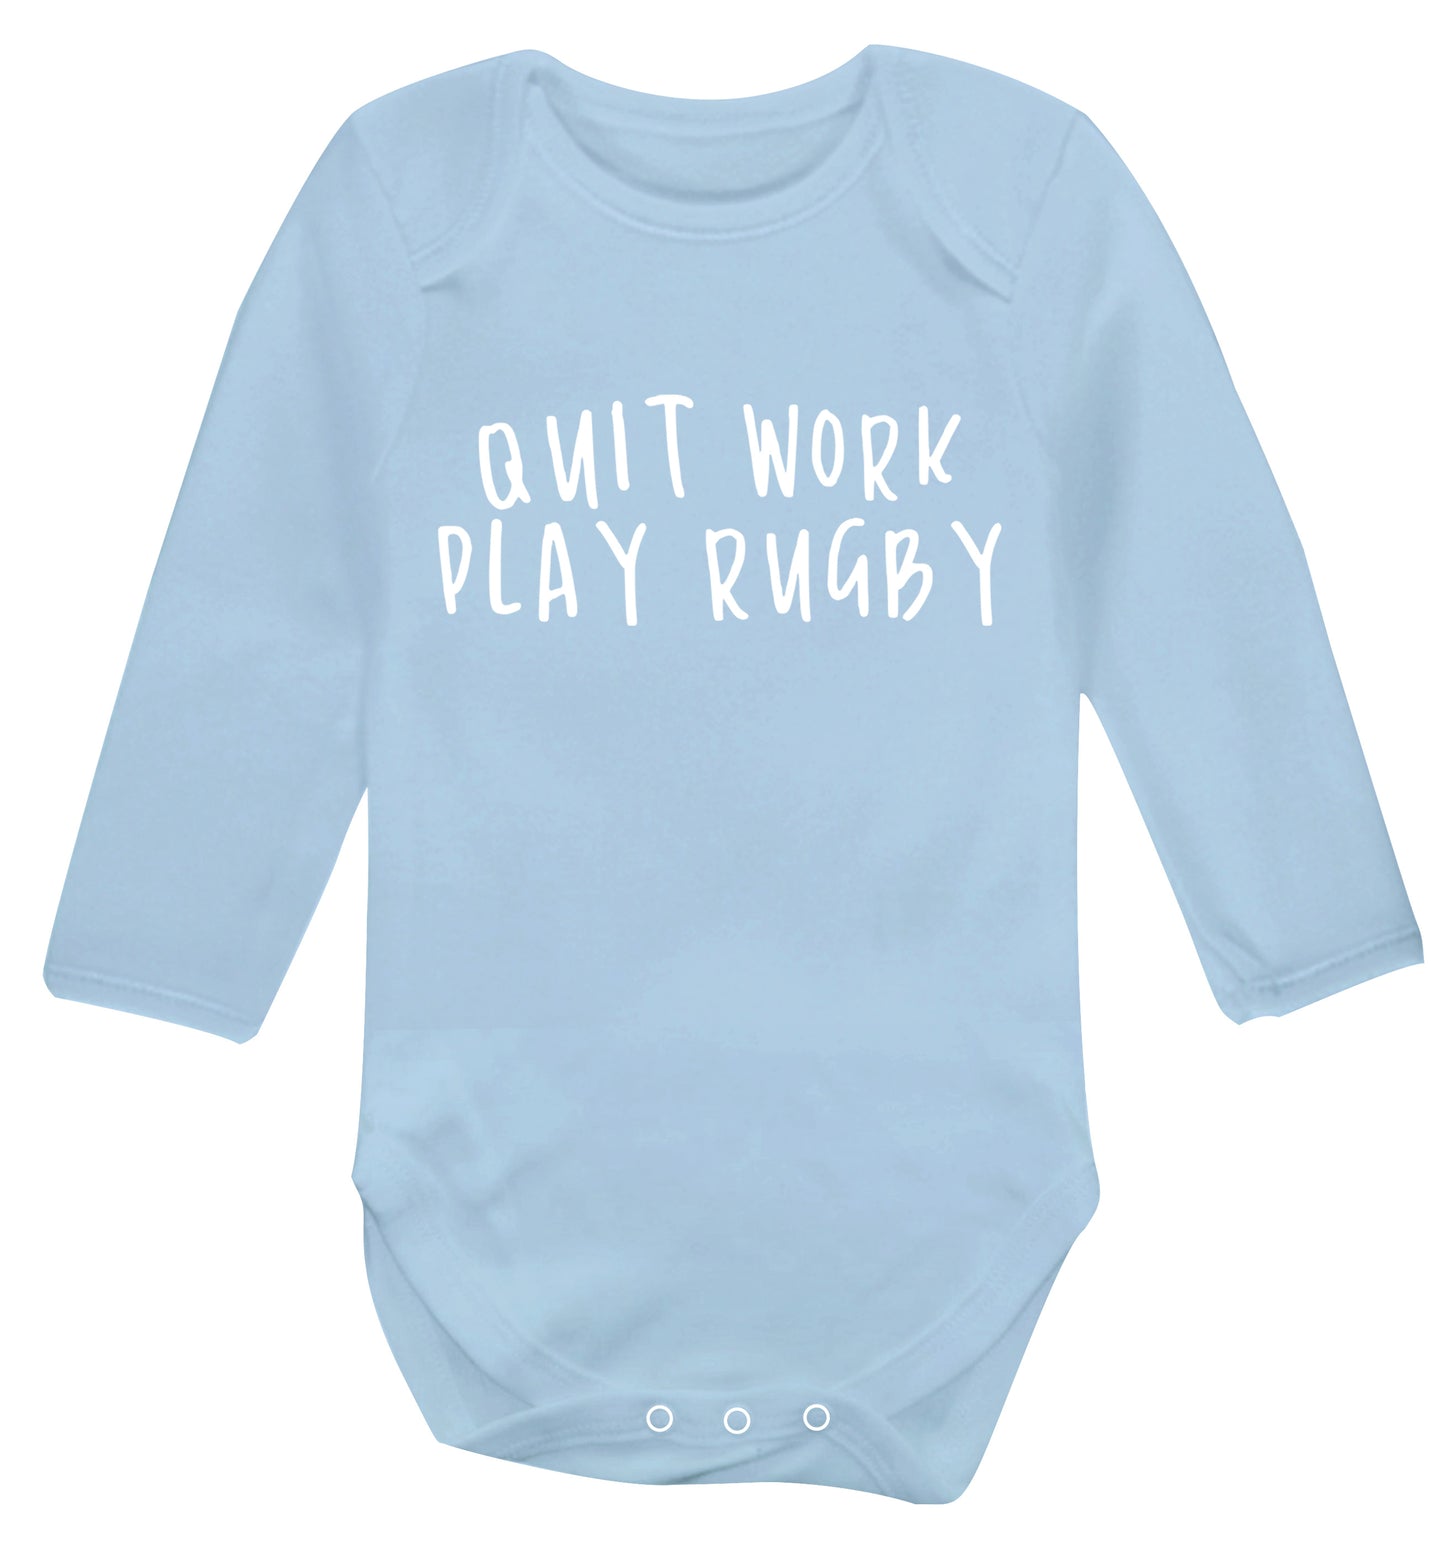 Quit work play rugby Baby Vest long sleeved pale blue 6-12 months